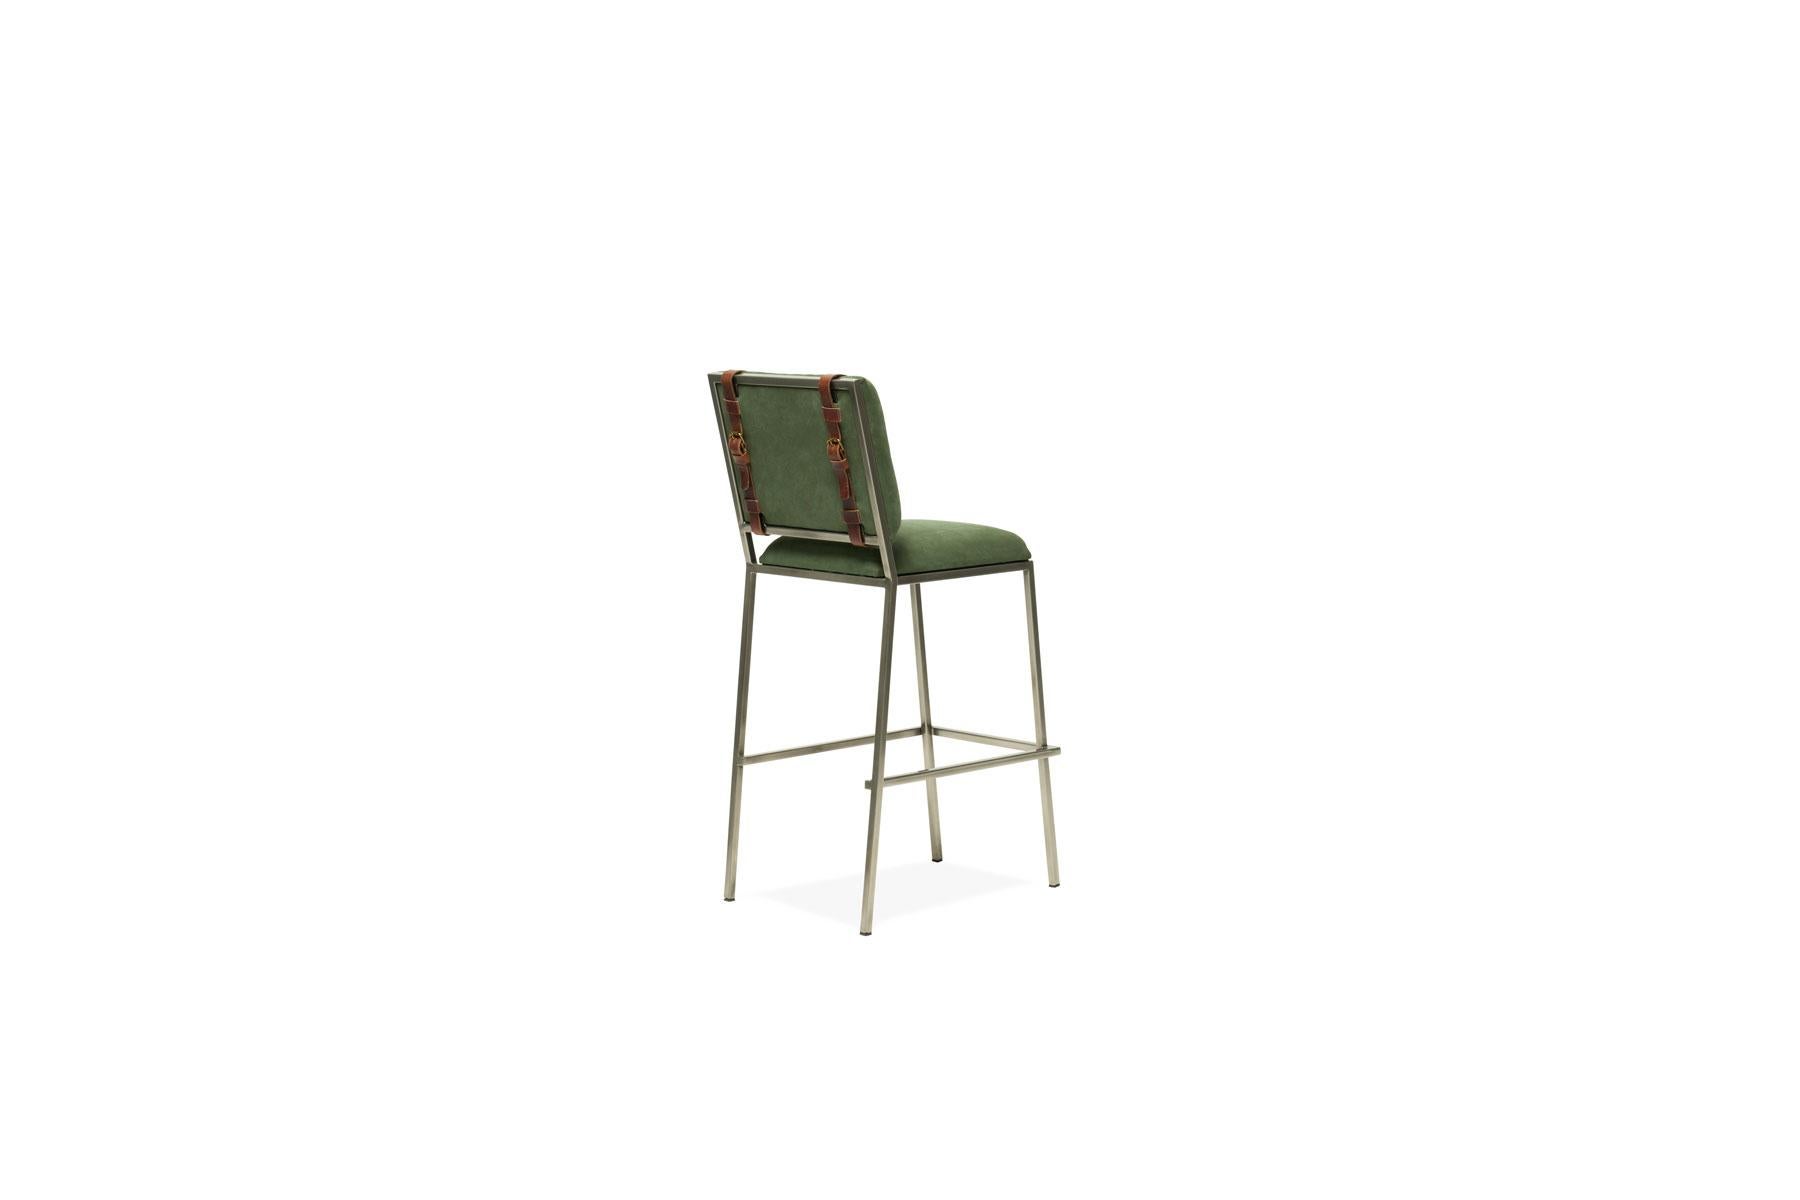 Metalwork Military Canvas & Antique Nickel Barstool For Sale